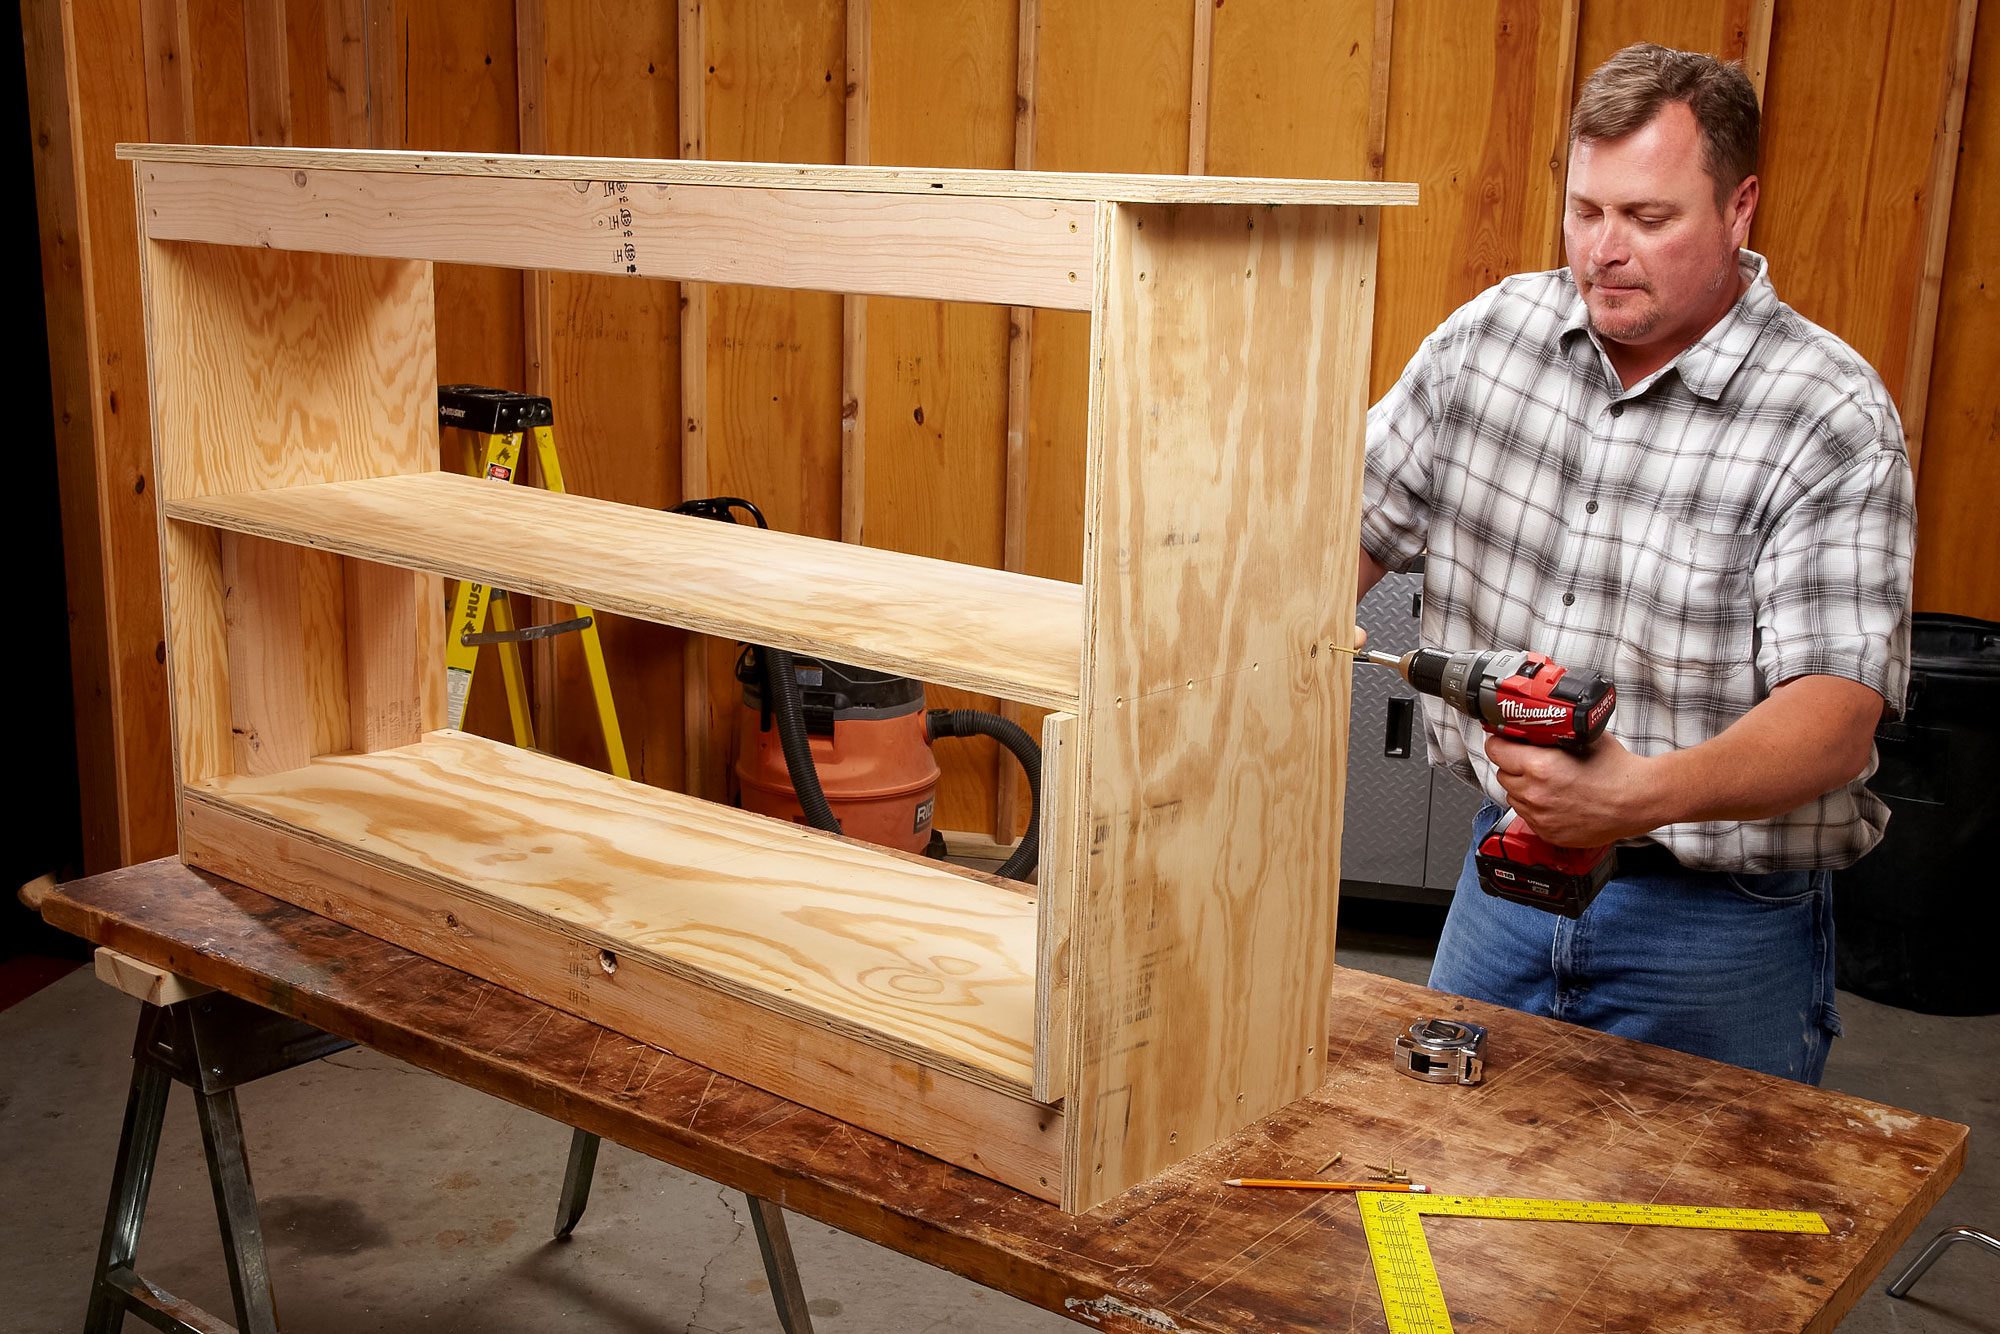 https://www.familyhandyman.com/wp-content/uploads/2019/06/FHM-How-To-Build-a-Workbench-for-Small-Spaces-FH12NOV_533_55_021_KSedit.jpg?fit=640%2C427